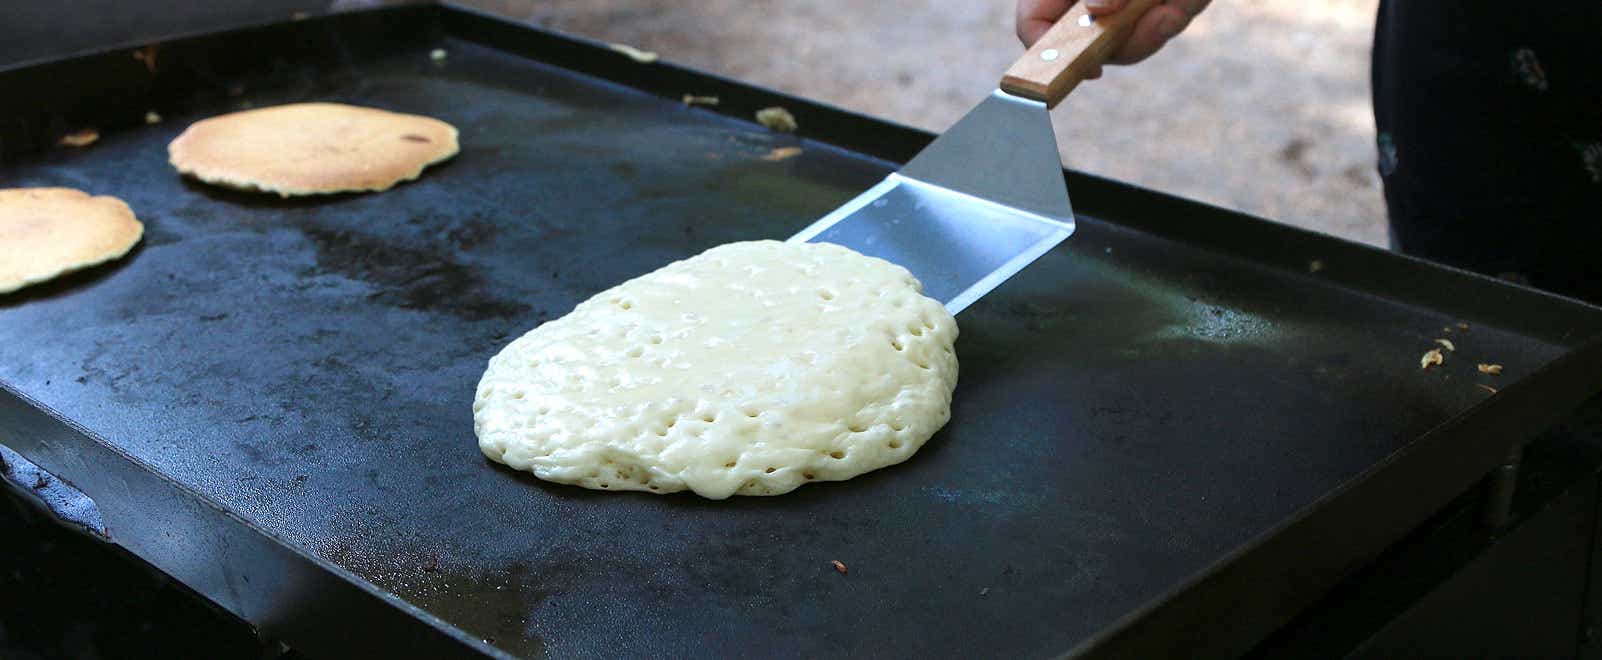 Pancakes cooking on a griddle top